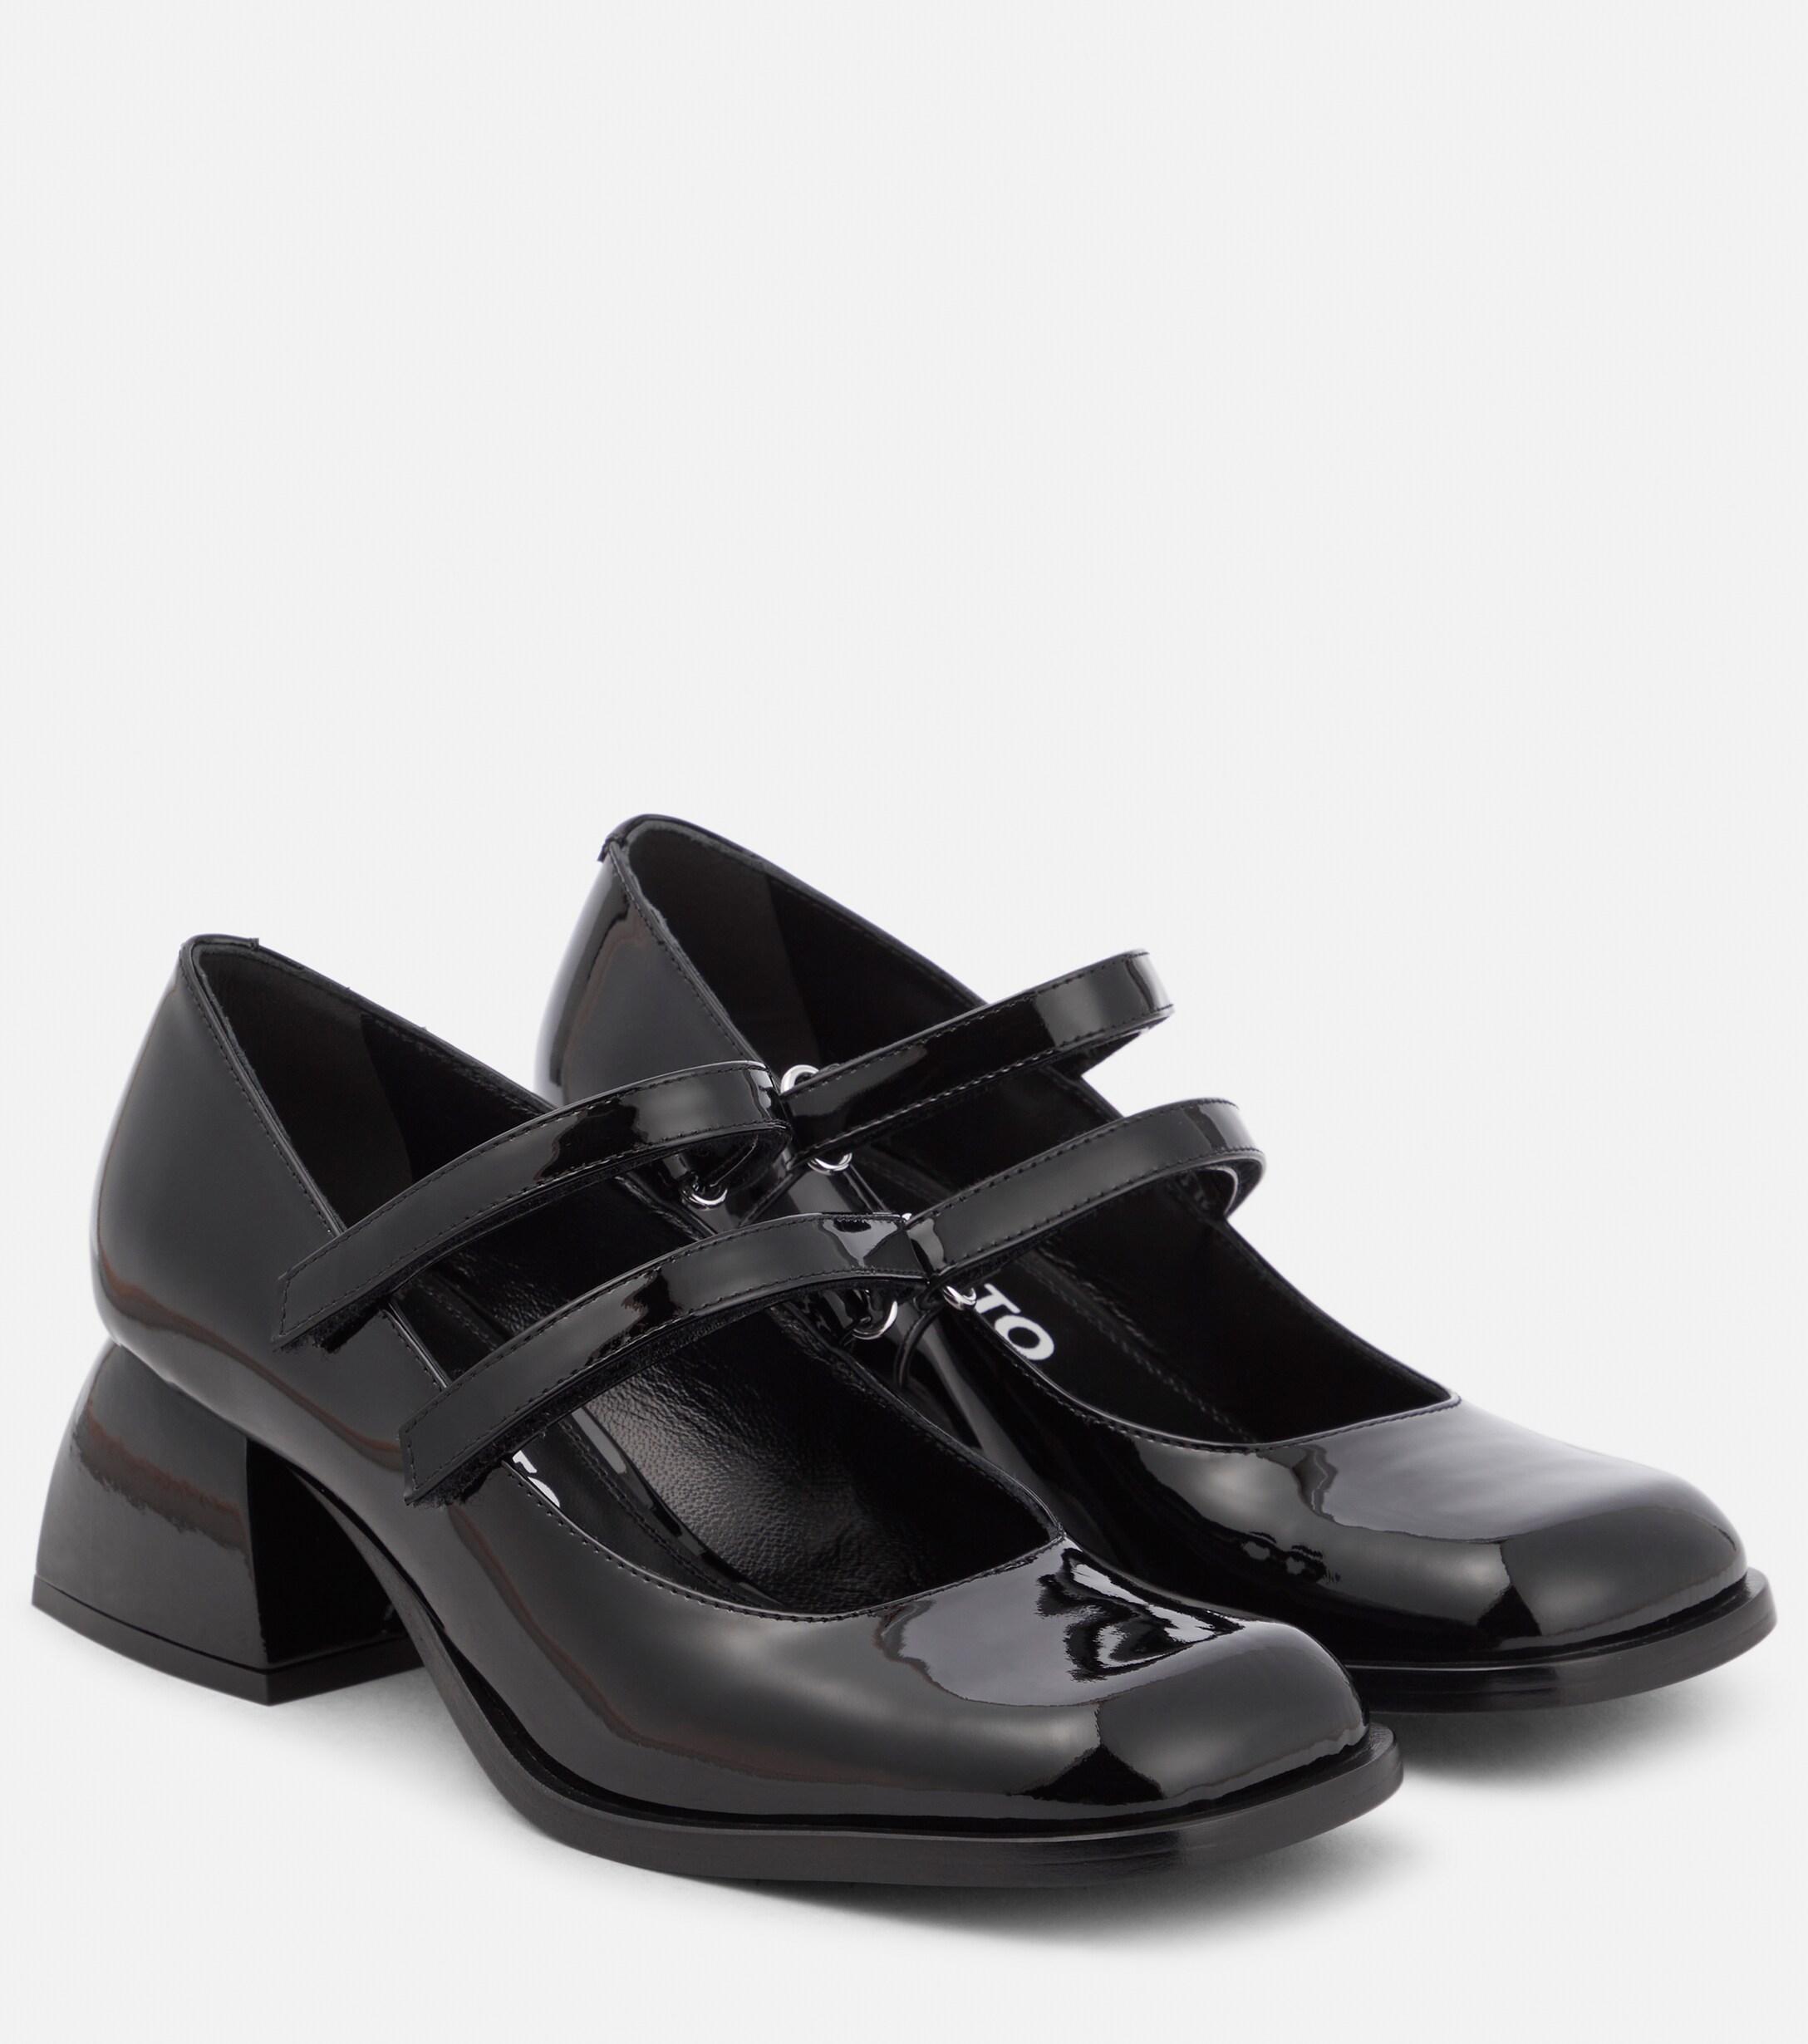 NODALETO Bulla Bacara Patent Leather Mary Jane Pumps in Black | Lyst ...